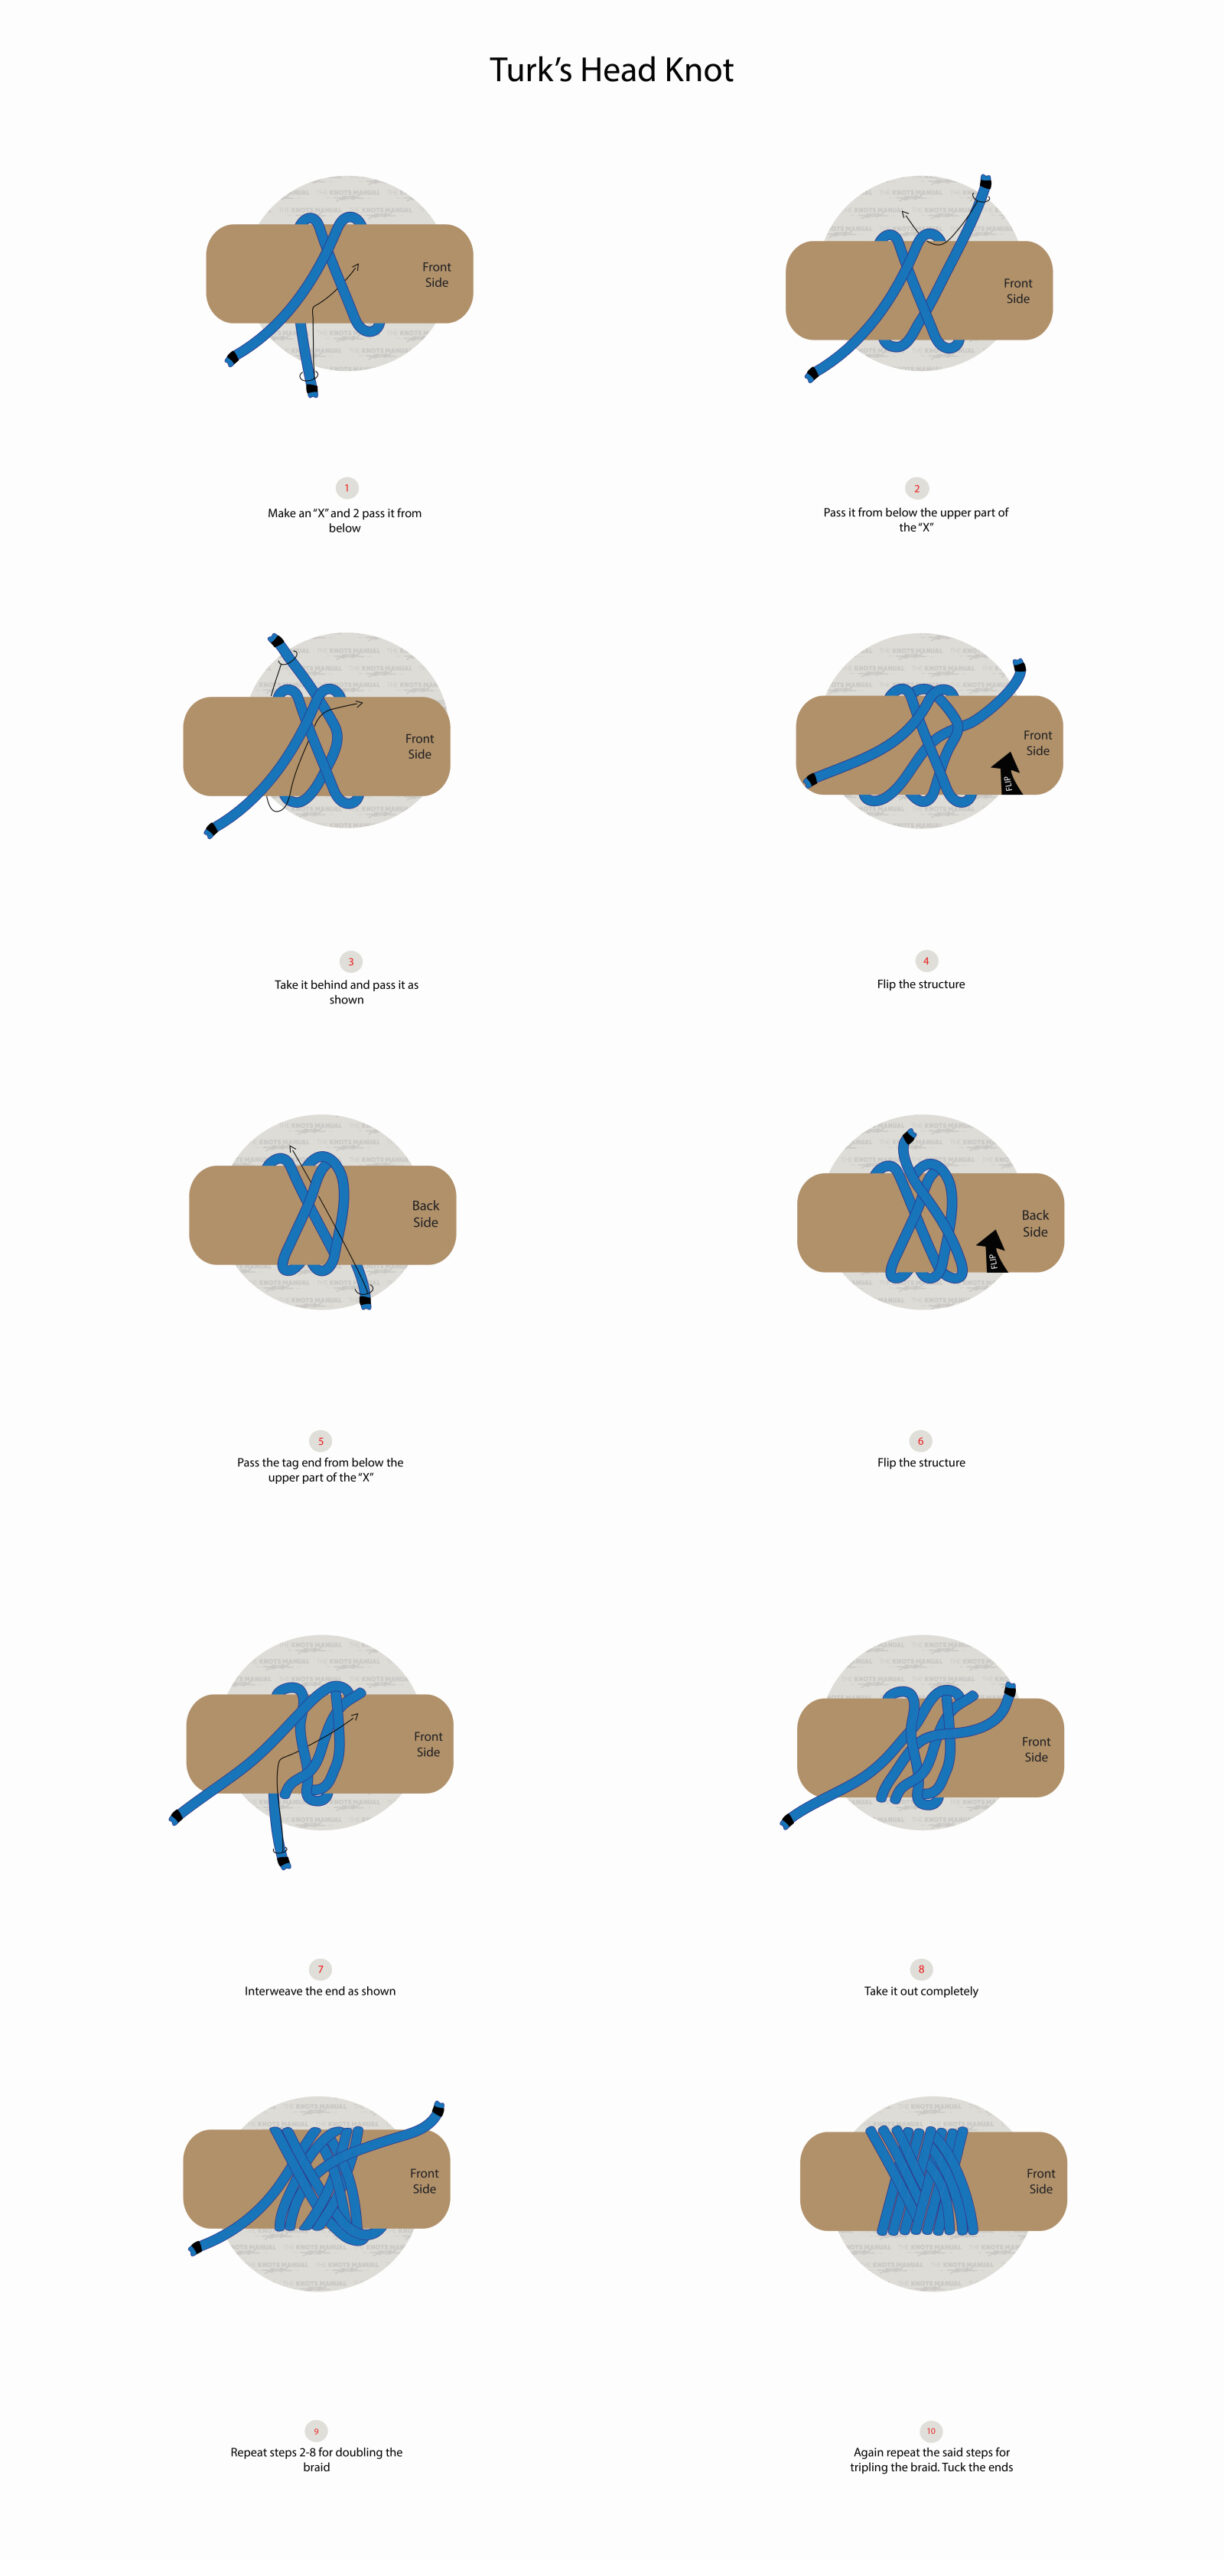 How To Tie A Turk's Head Knot